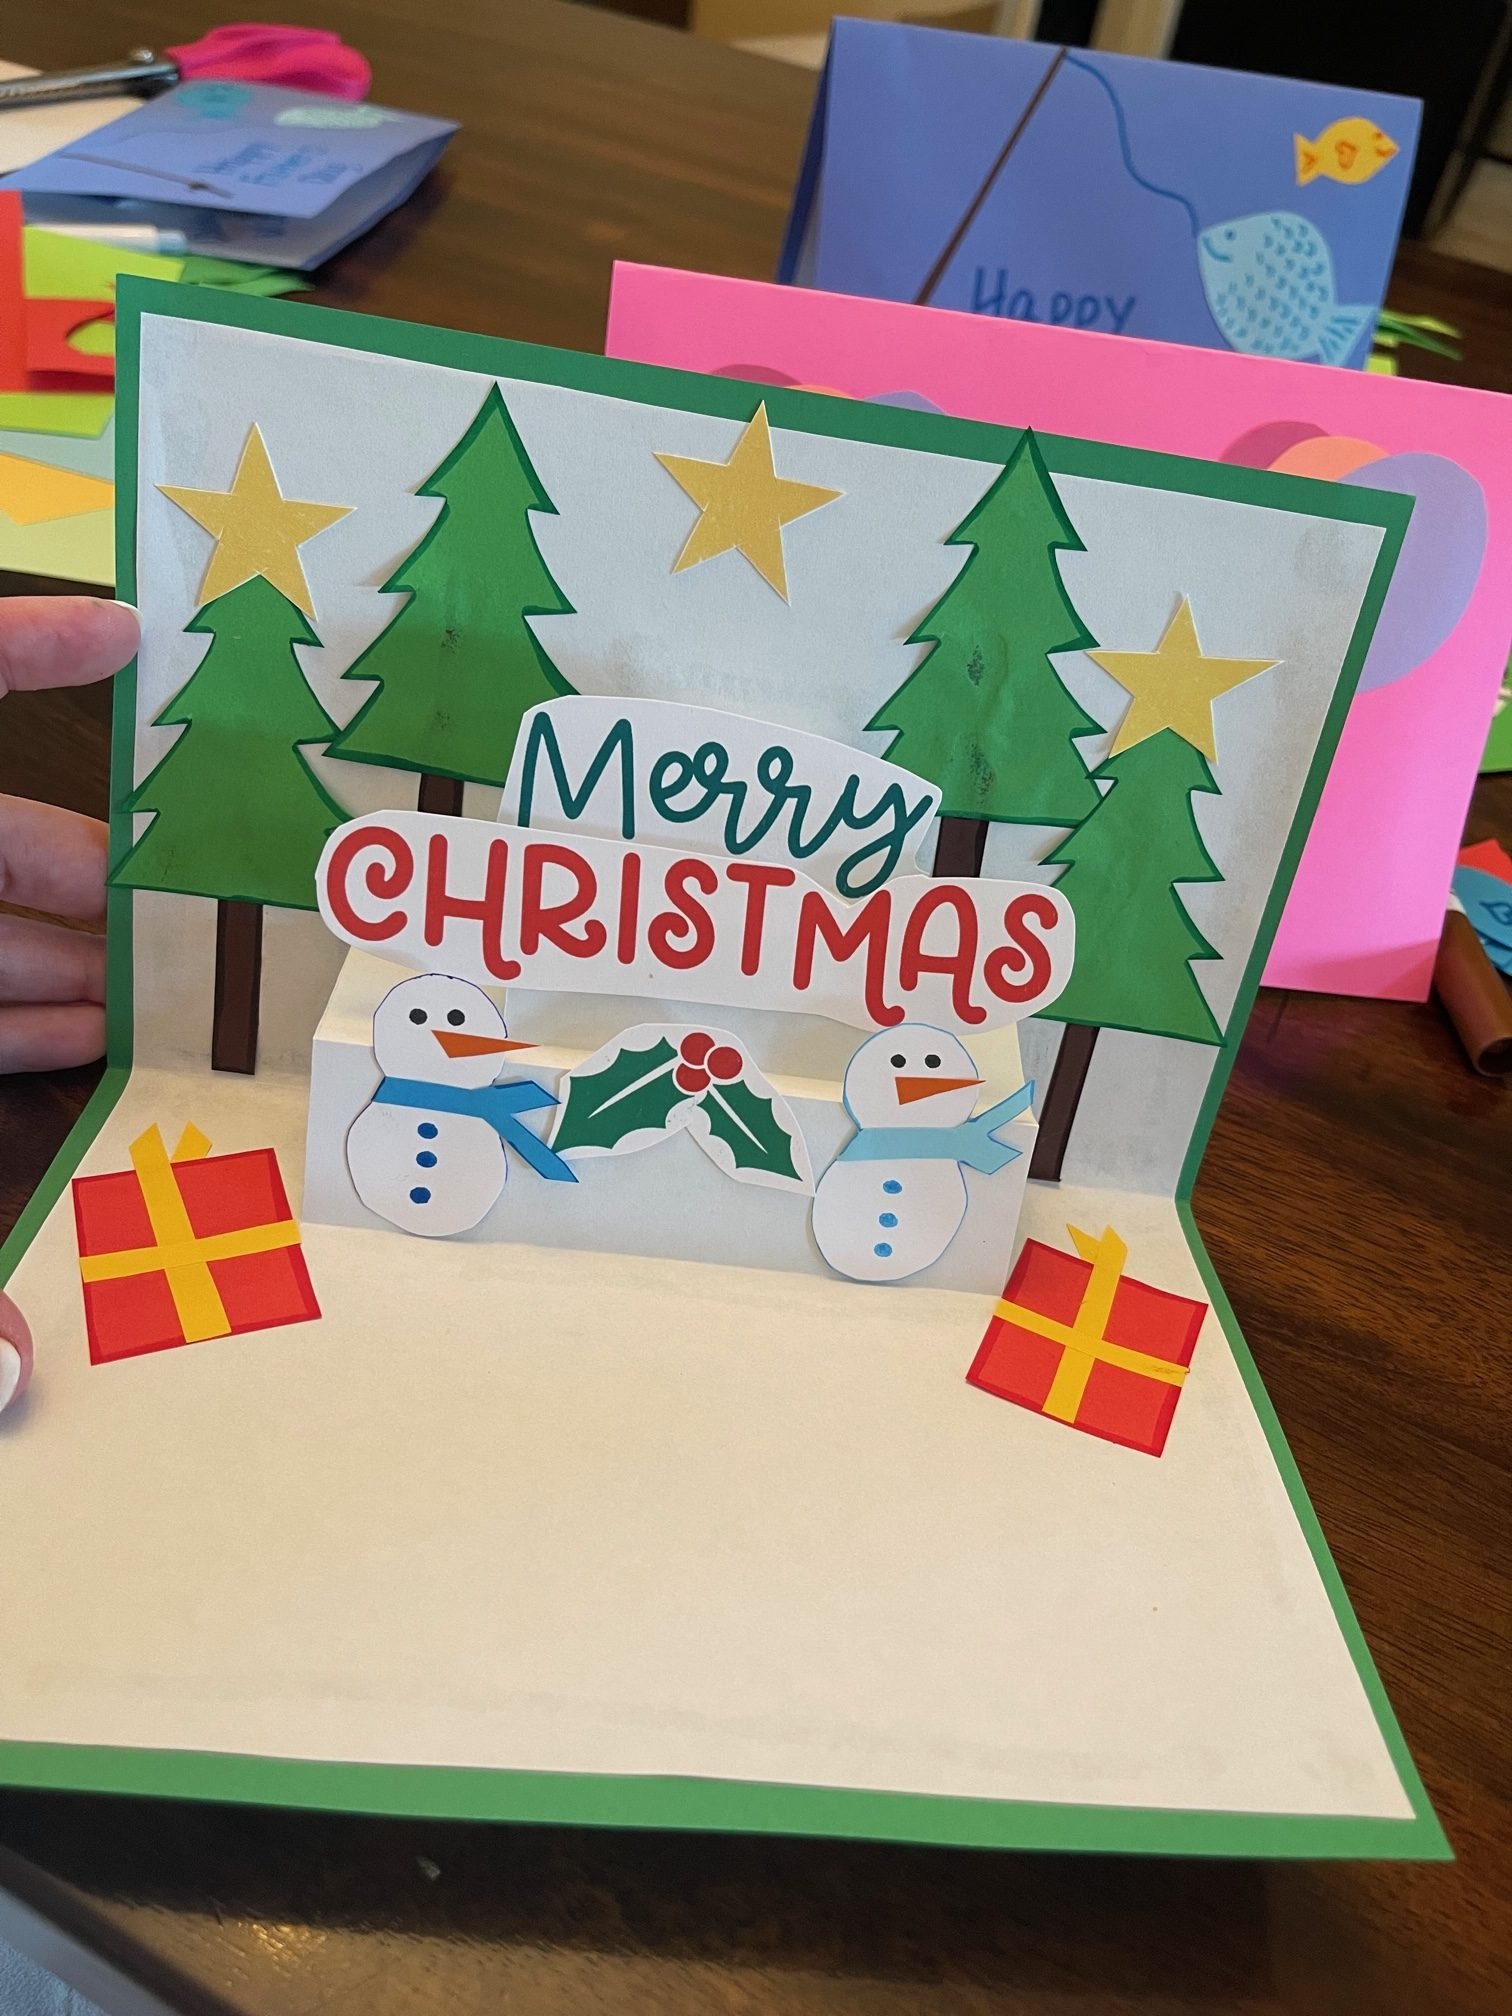 finished product of a Christmas card with trees, snowmen, presents and Merry Christmas banner